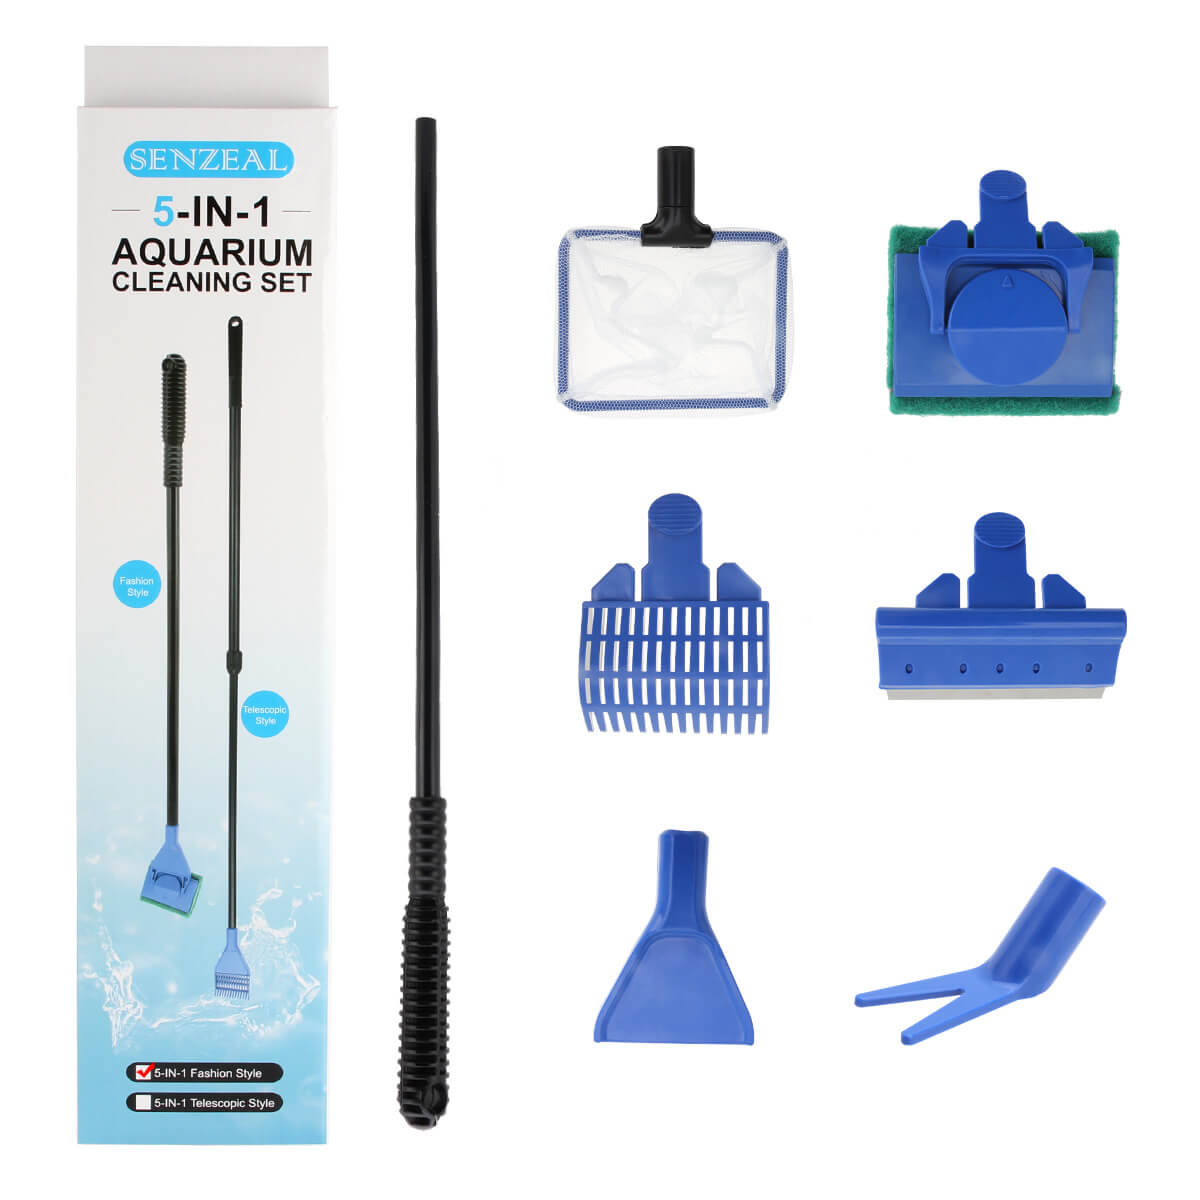 5-in-1 Fish Tank Cleaning Kit at Low Price Buy Online